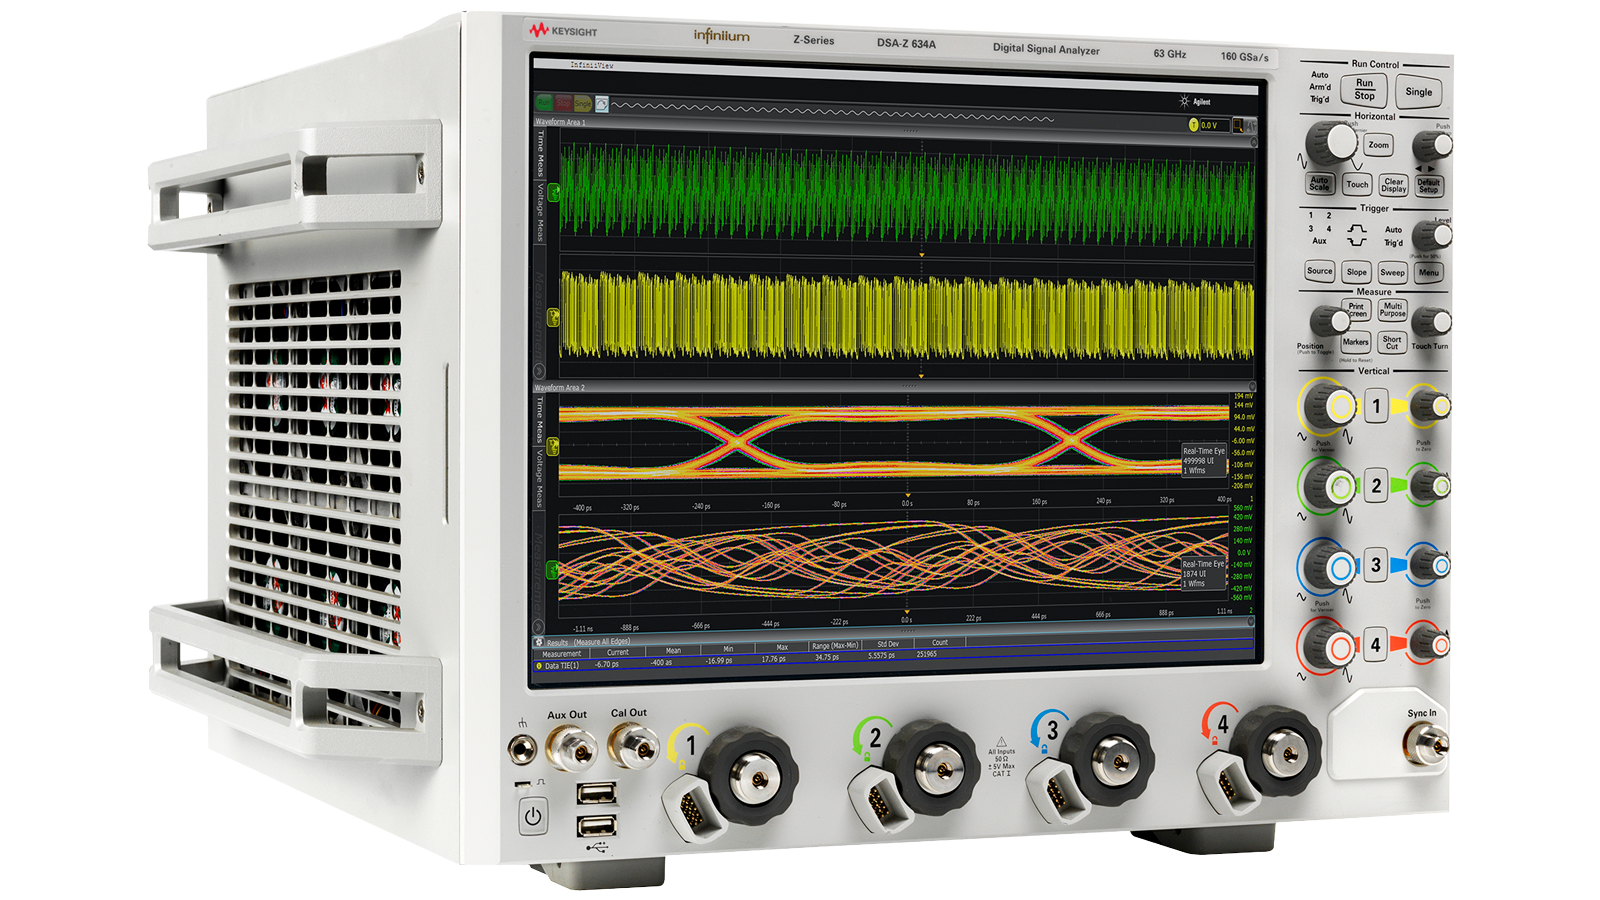 Angled view of Infiniium Z-Series High-Performance Real-Time Oscilloscope